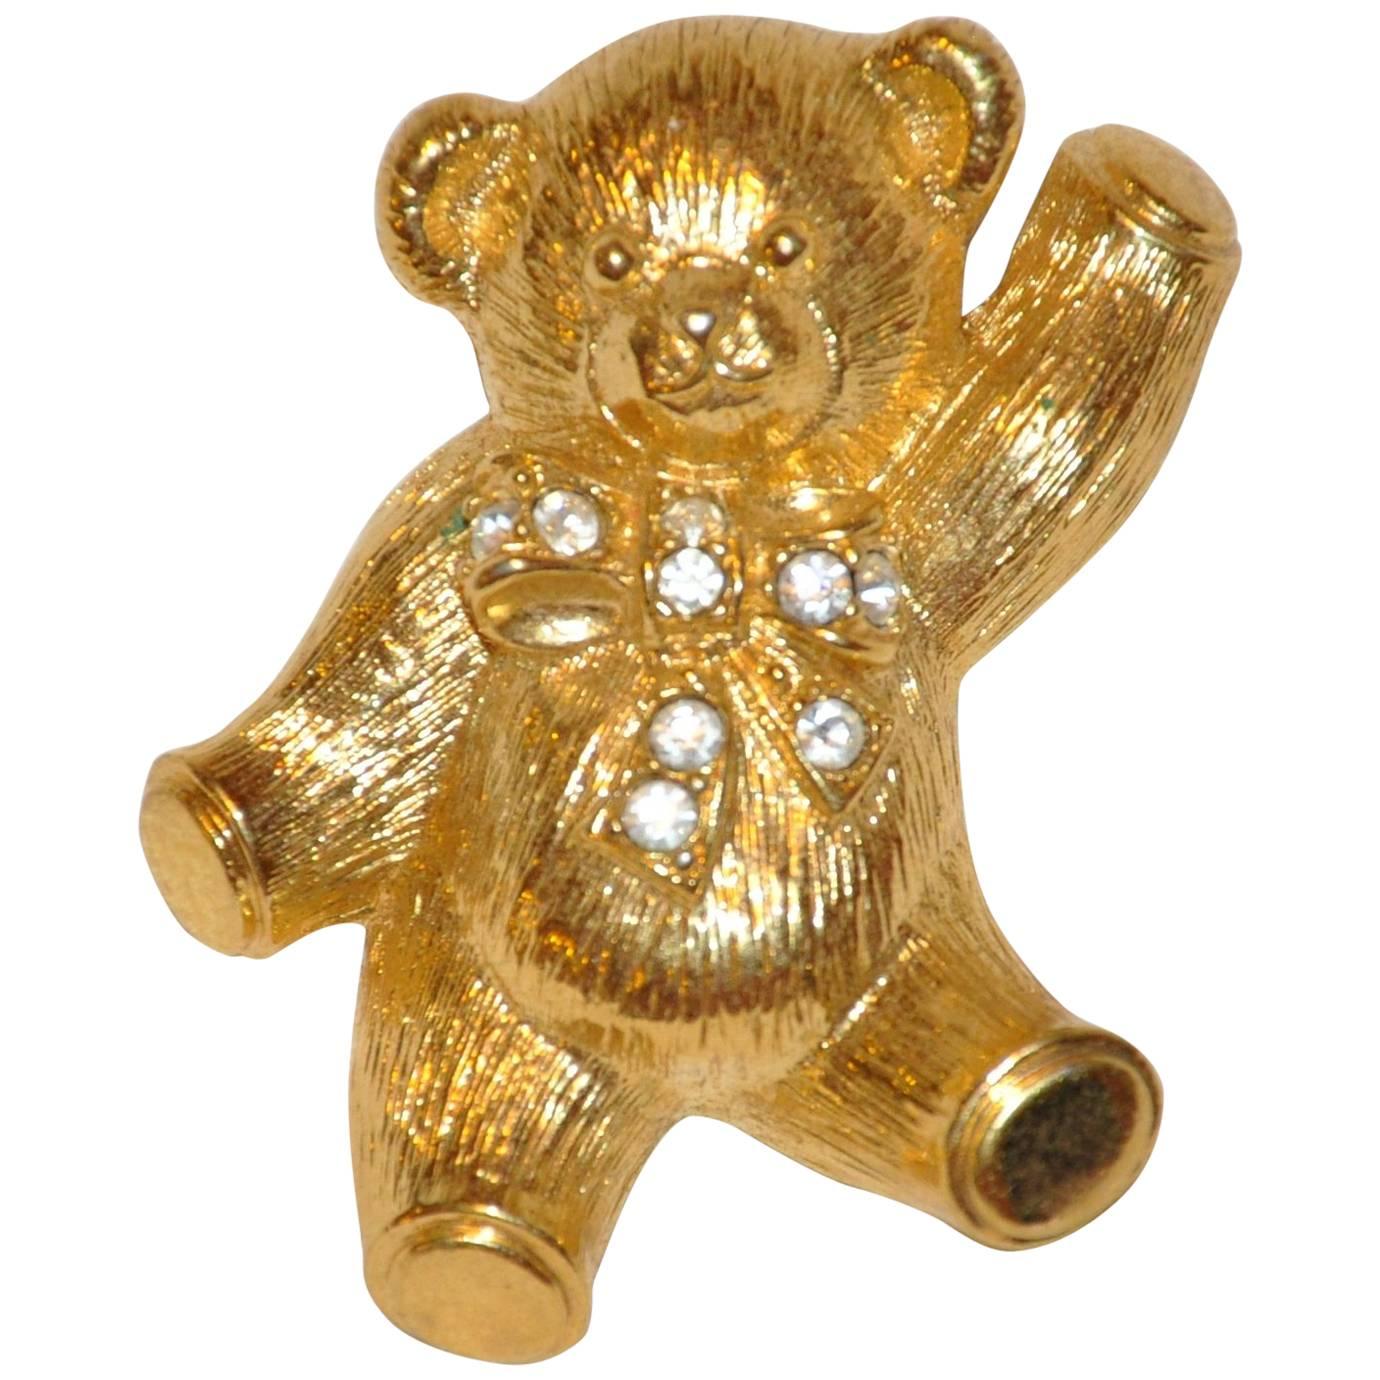 Large Whimsical Polished Gilded Gold Vermeil "Teddy" Brooch & Pendant